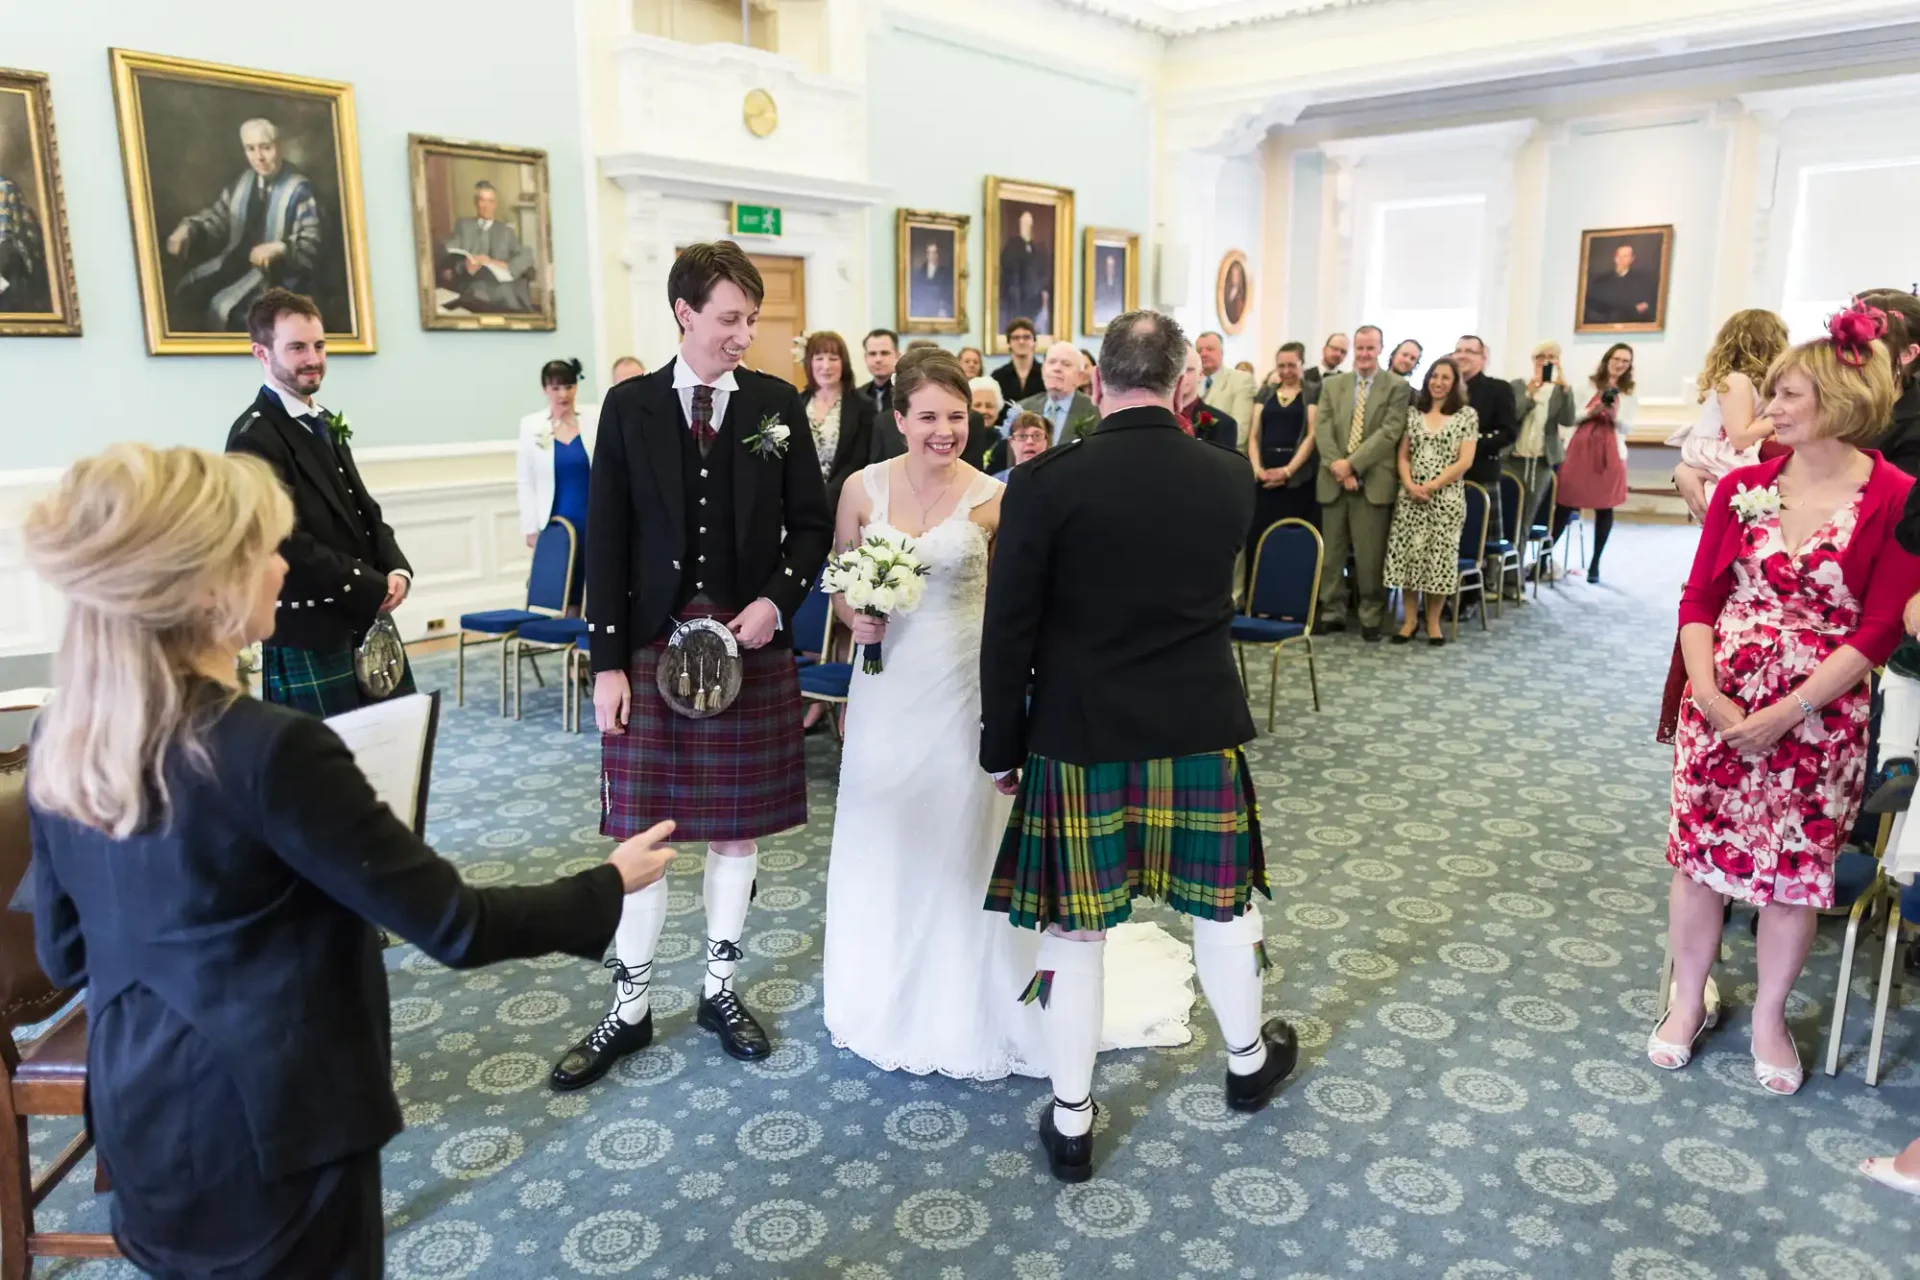 A joyful bride and groom walk down the aisle, the groom in a kilt, as guests watch and a woman scatters flower petals in a decorated room with portraits on the walls.